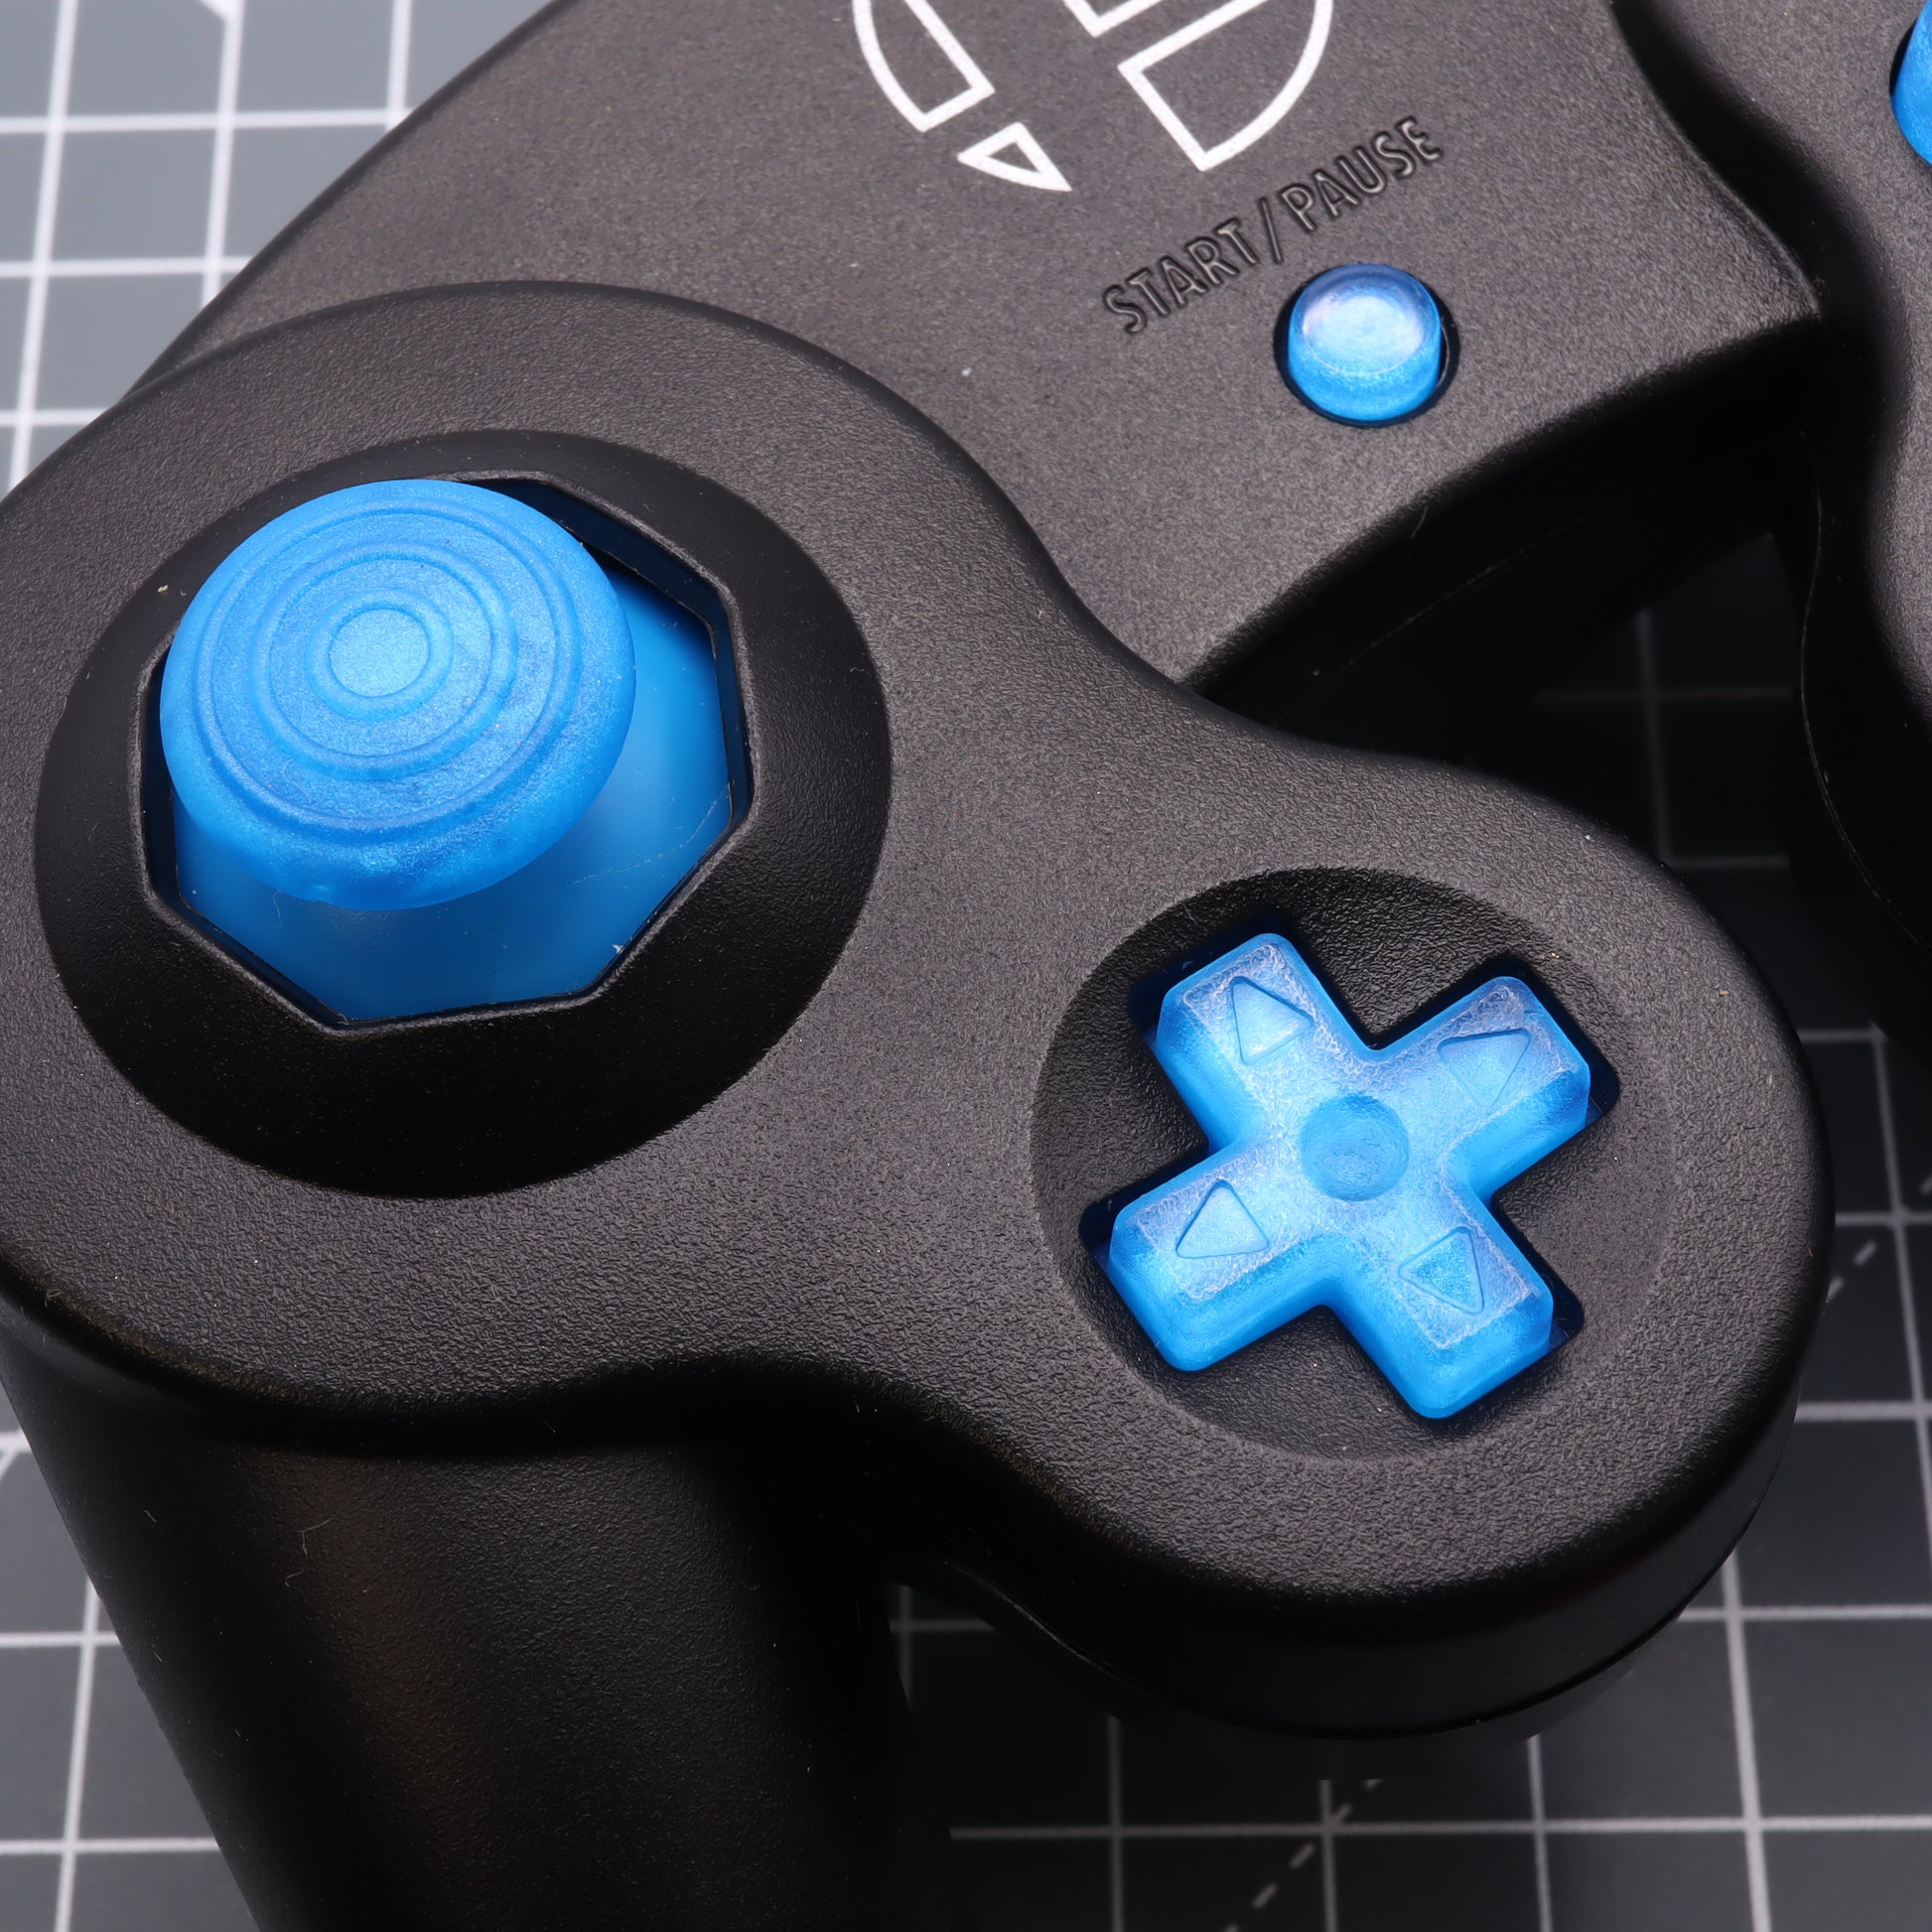 Close-up of a black GameCube controller with custom-cast blue buttons and directional pad.